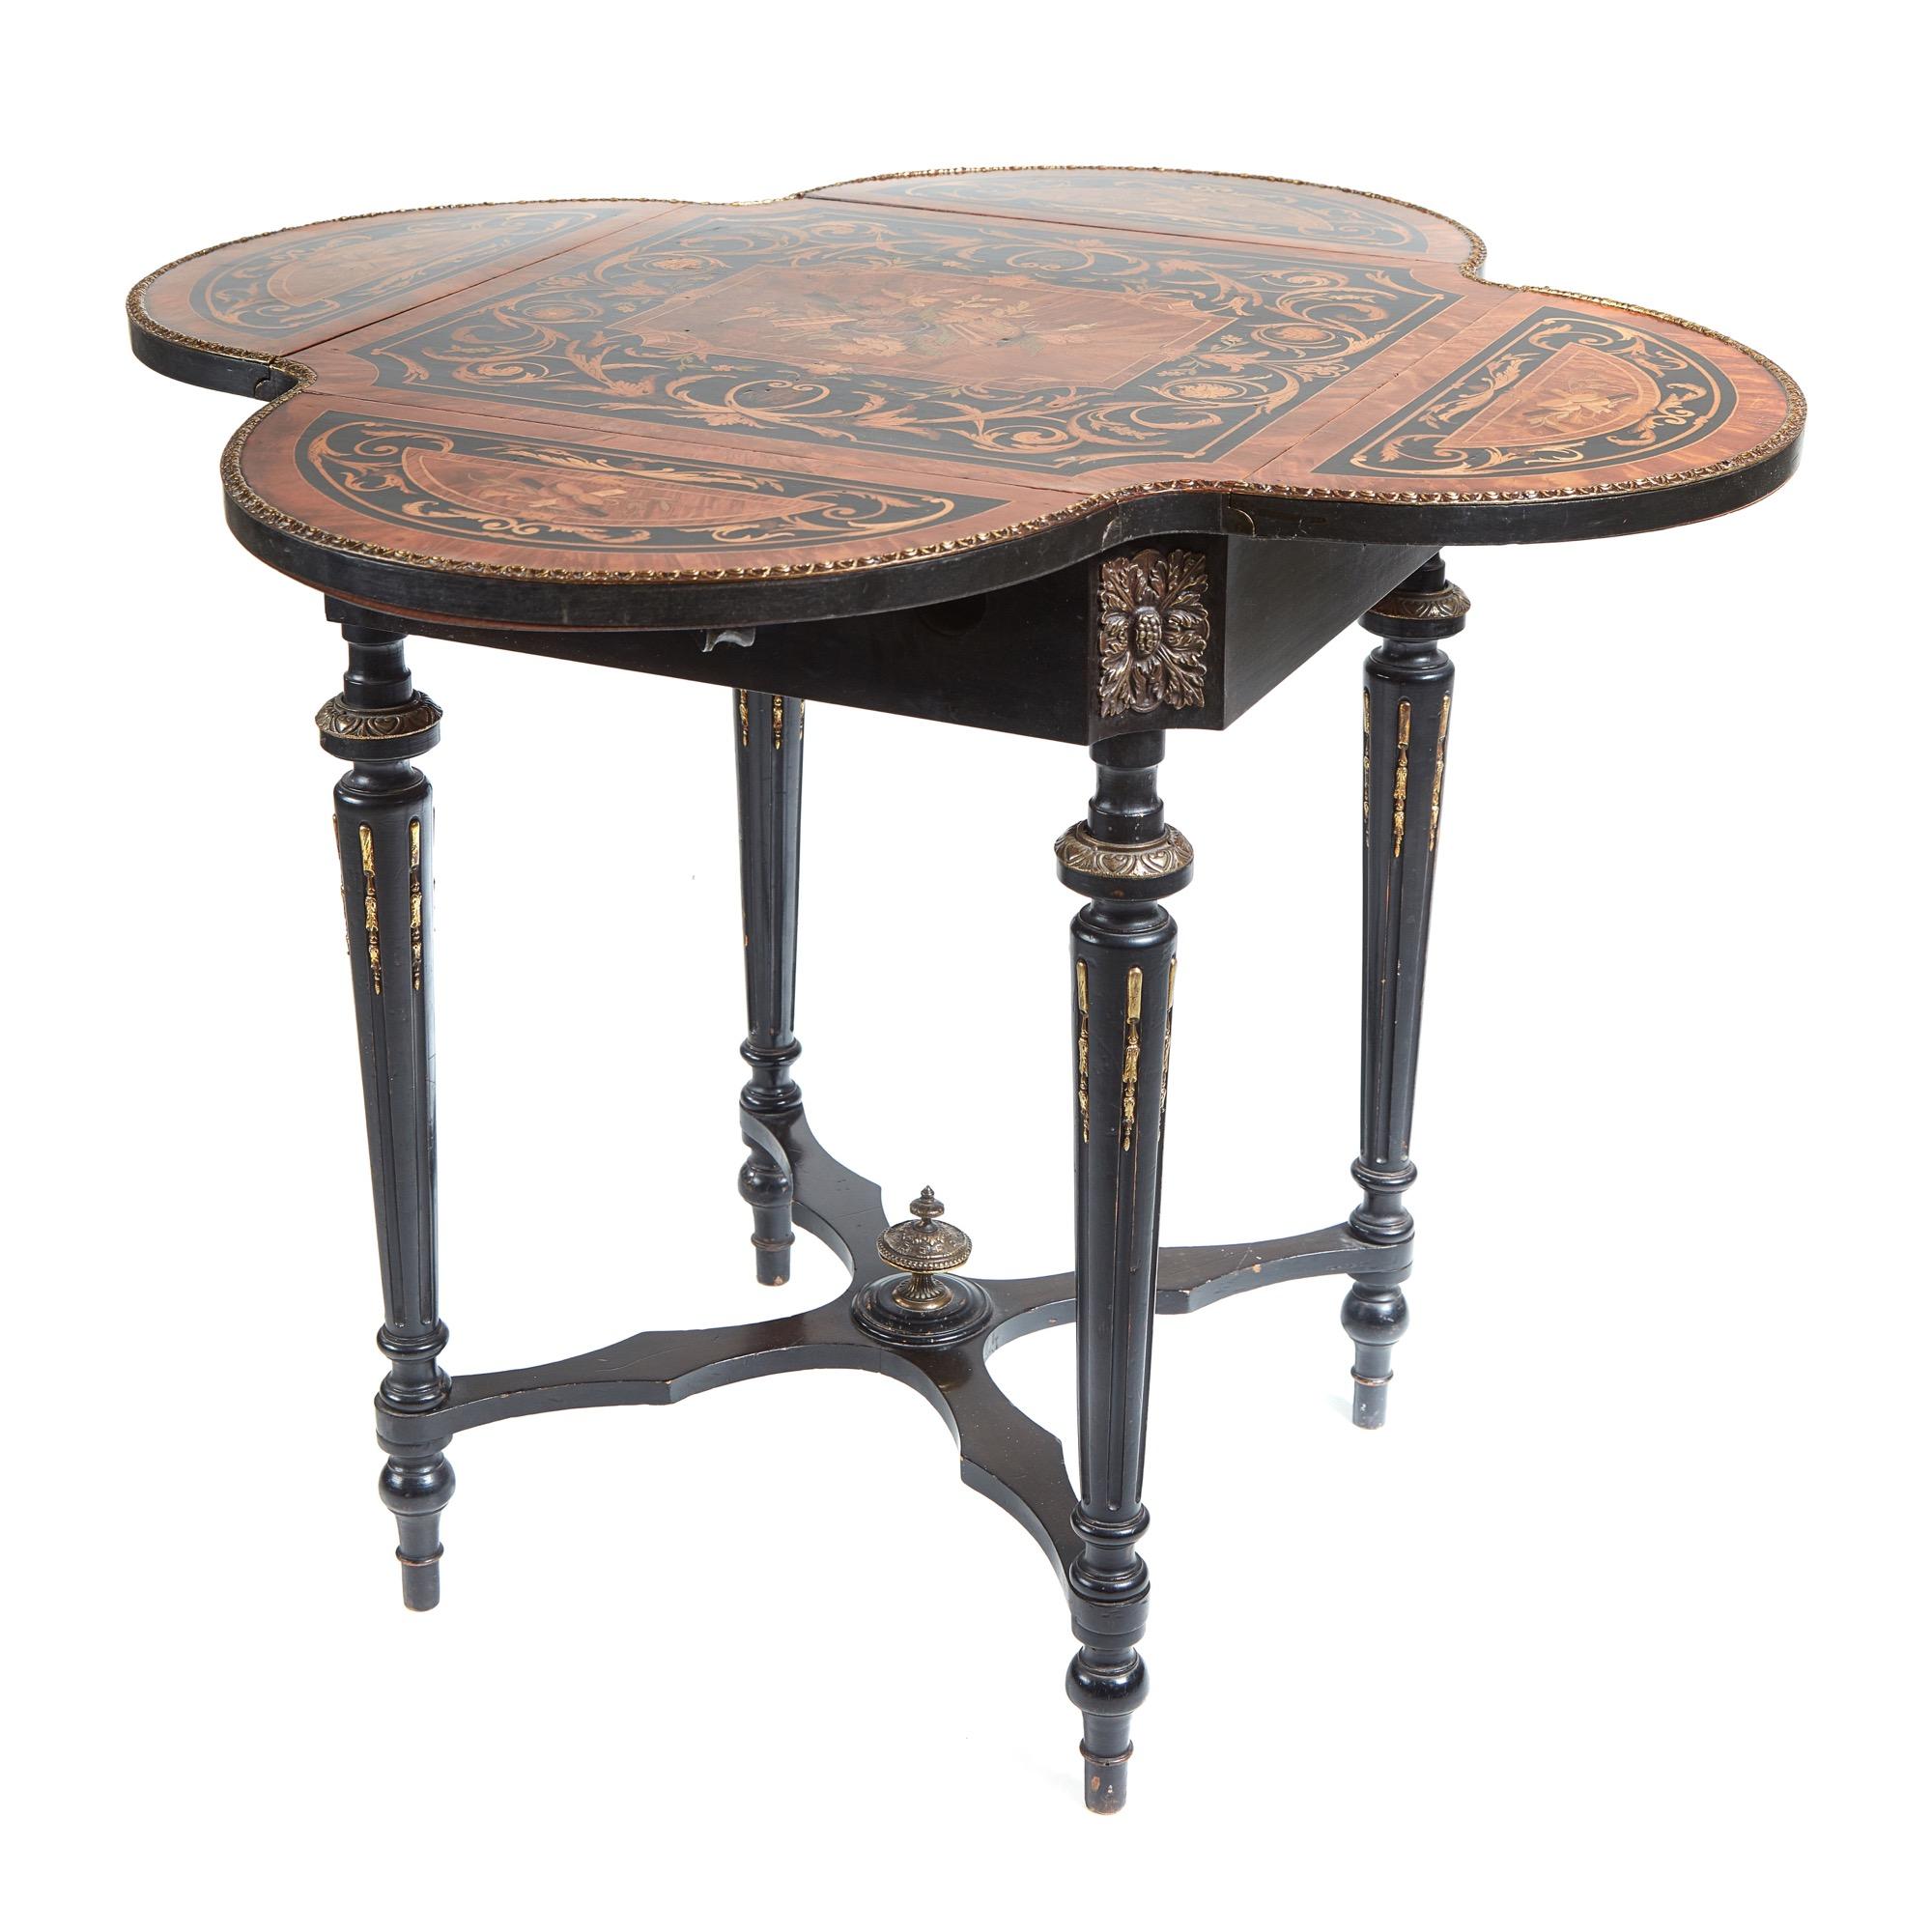 Fine French antique marquetry drop leaf occasional table, the top with fine marquetry, satinwood, walnut, boxwood, kingwood and black lacquer inlay framed within a kingwood cross-banding and boxwood stringing, the four shaped drop leafs with good